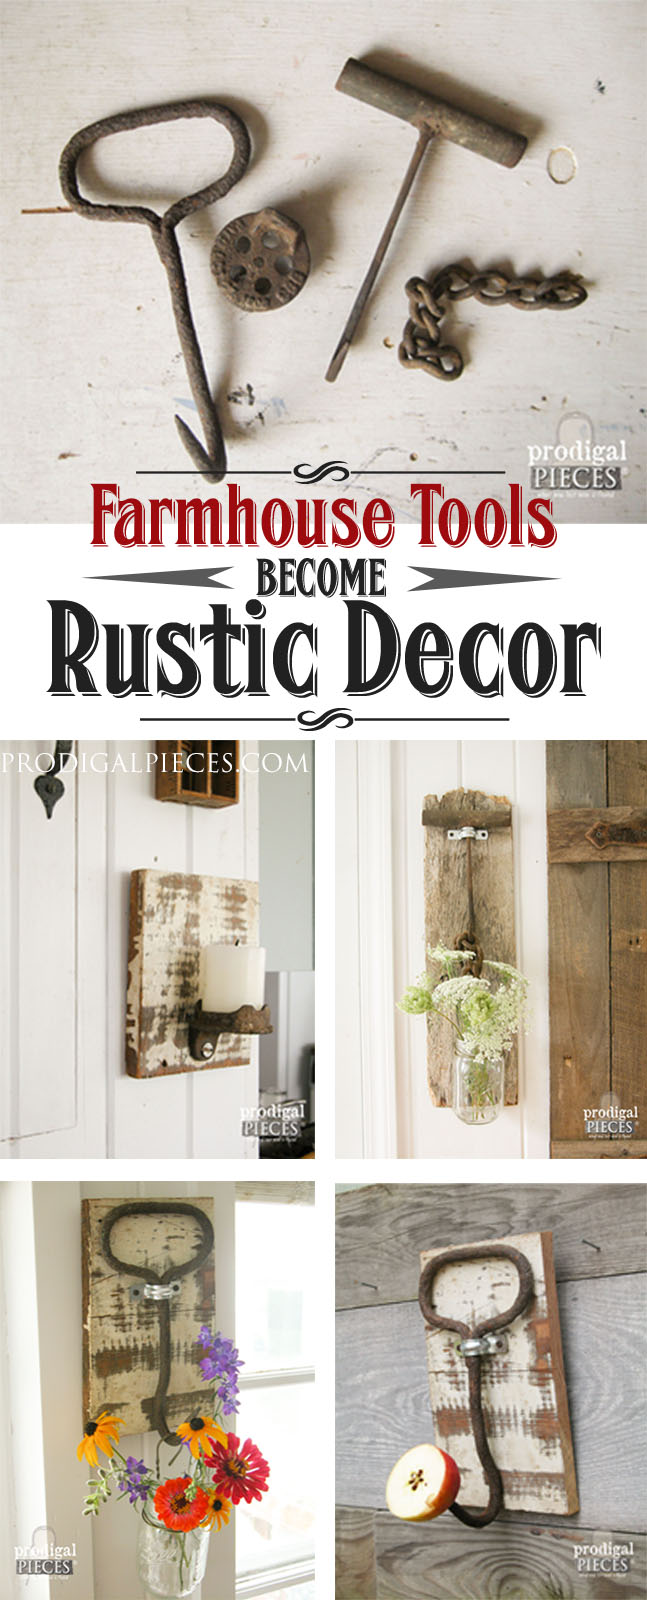 Old Farmhouse Tools Repurposed as Rustic Decor by Prodigal Pieces | www.prodigalpieces.com